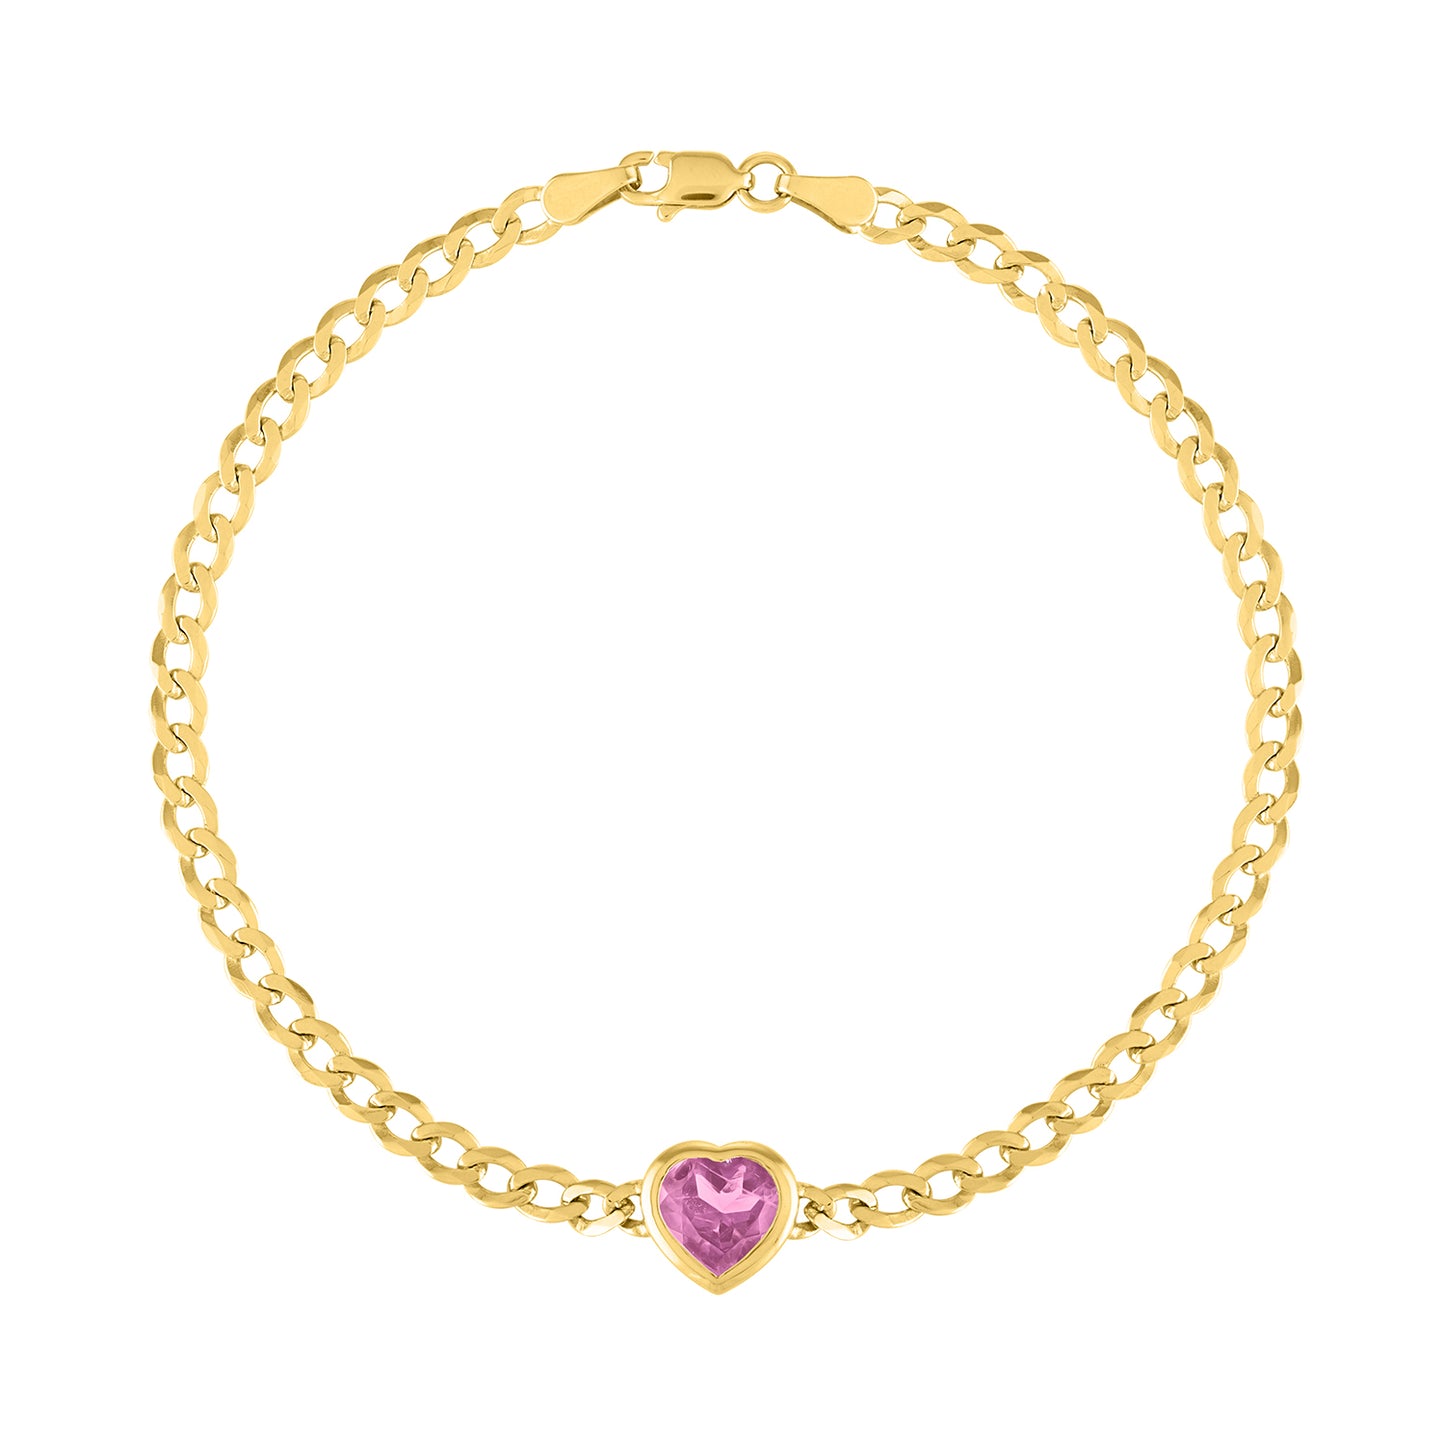 Yellow gold cuban link chain bracelet with a heart shaped bezeled pink tourmaline in the center.